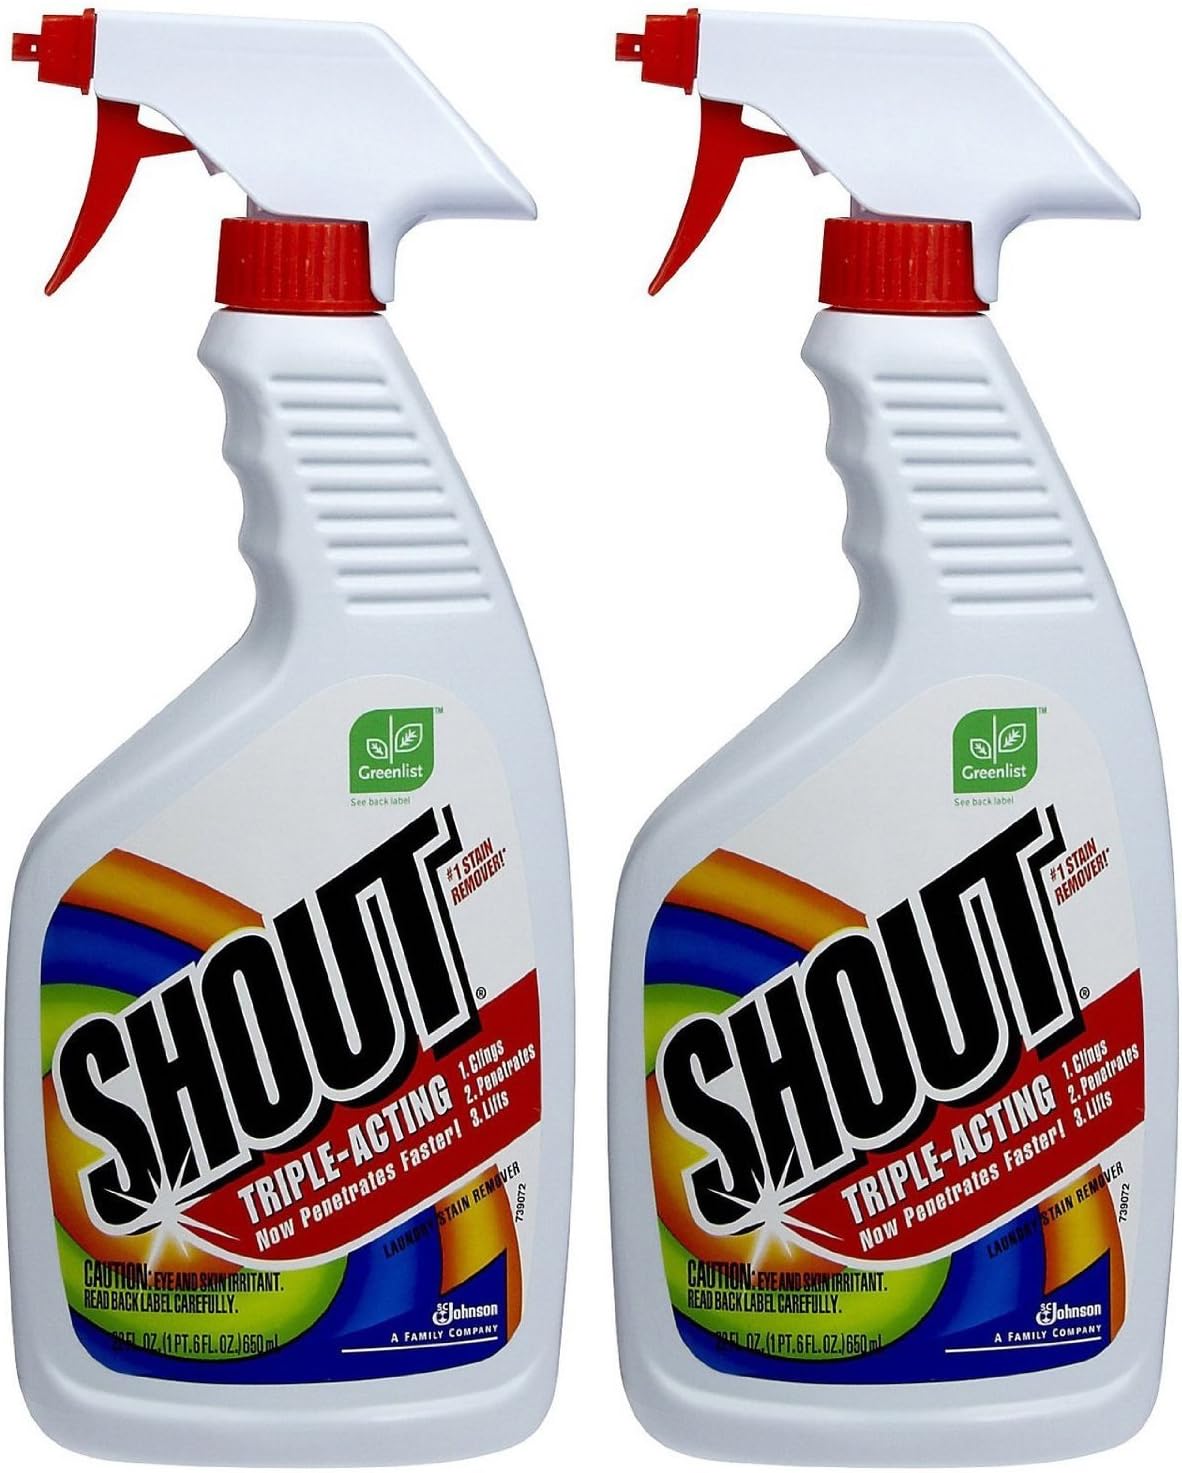 Shout, Laundry Stain Remover,Trigger Spray, Triple-Acting 30 Fl. Oz. (Pack of 2) : Health & Household